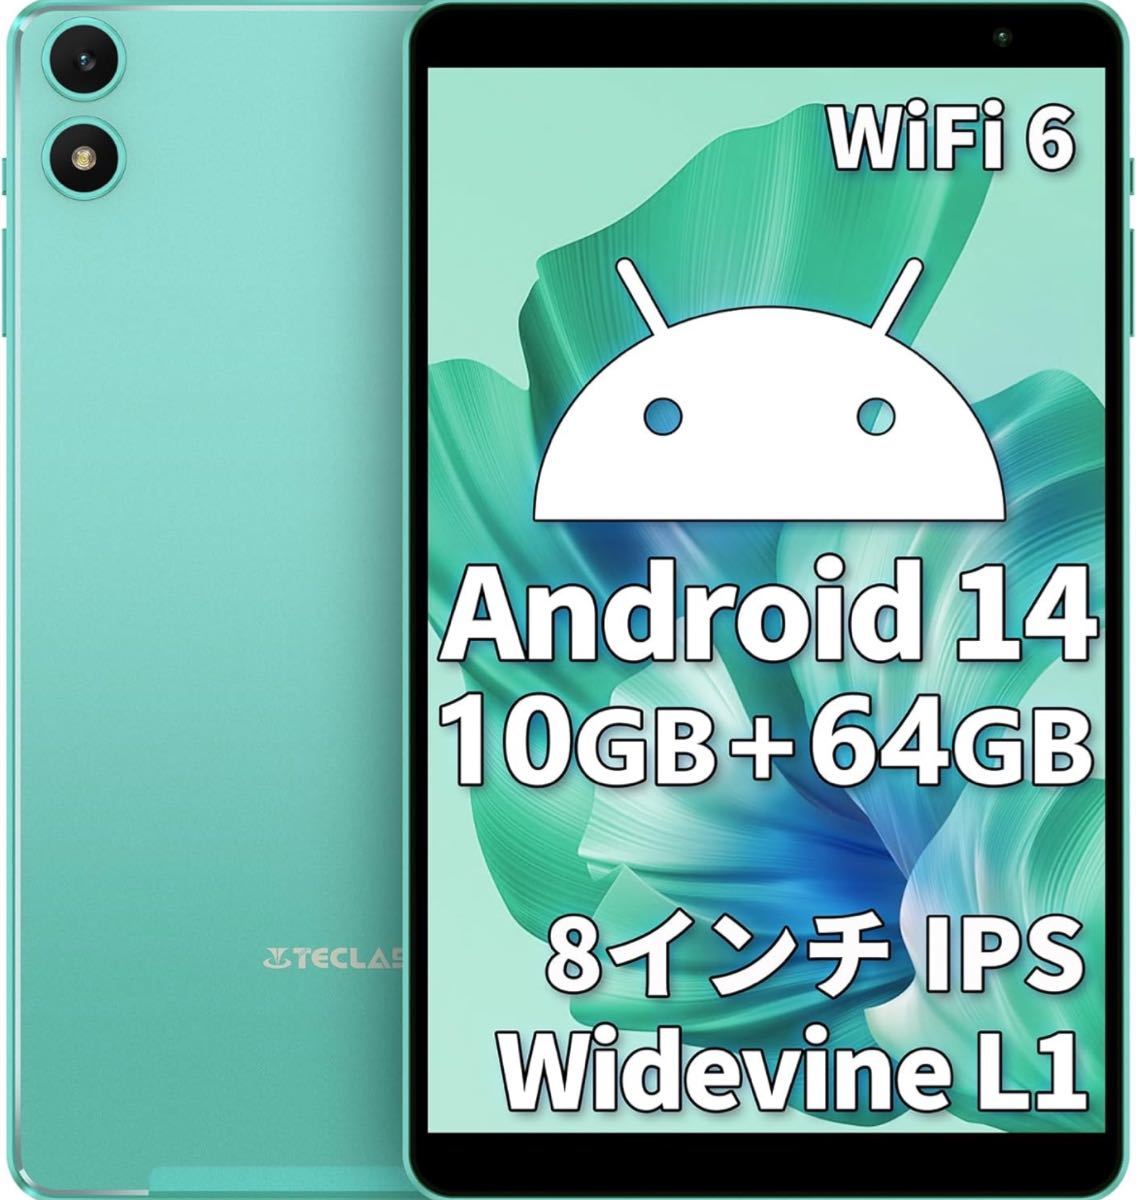 Android 14 タブレット 8インチ新登場 アンドロイド タブレット 8インチ wi-fiモデル、10GB+64GB+1TB TF拡張、Widevine L1タブレット_画像1